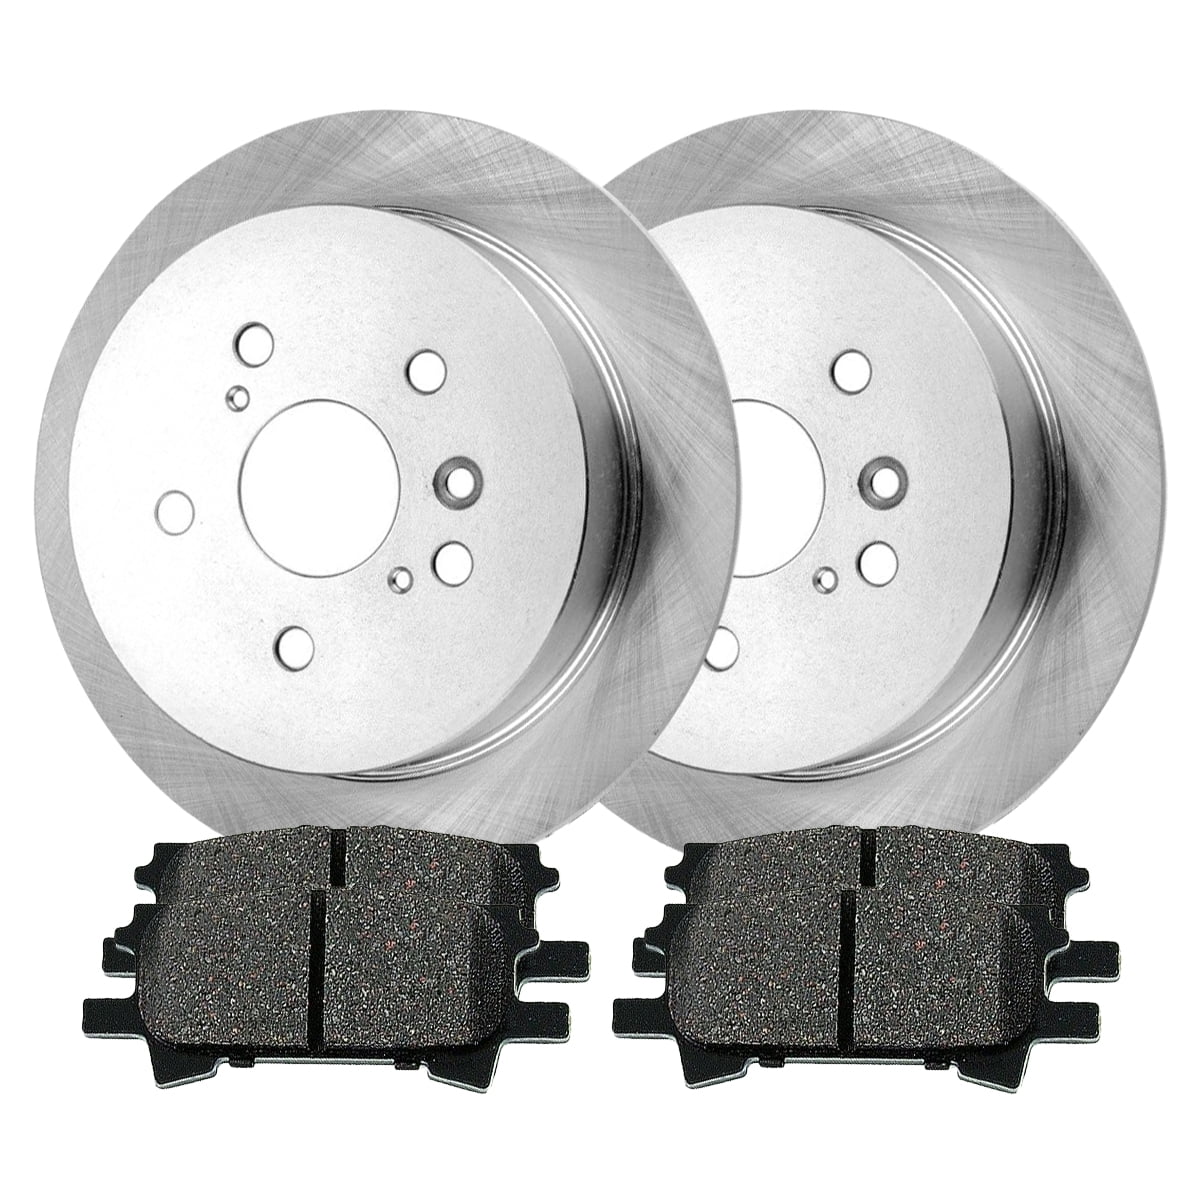 2006-2007 for Toyota Highlander 2006-2008 for Lexus RX400h 2007-2009 for Lexus RX350 ECCPP 2pcs Front Brake Rotors and 4pcs Ceramic Disc Brake Pads Fit for 2004-2006 for Lexus RX330 